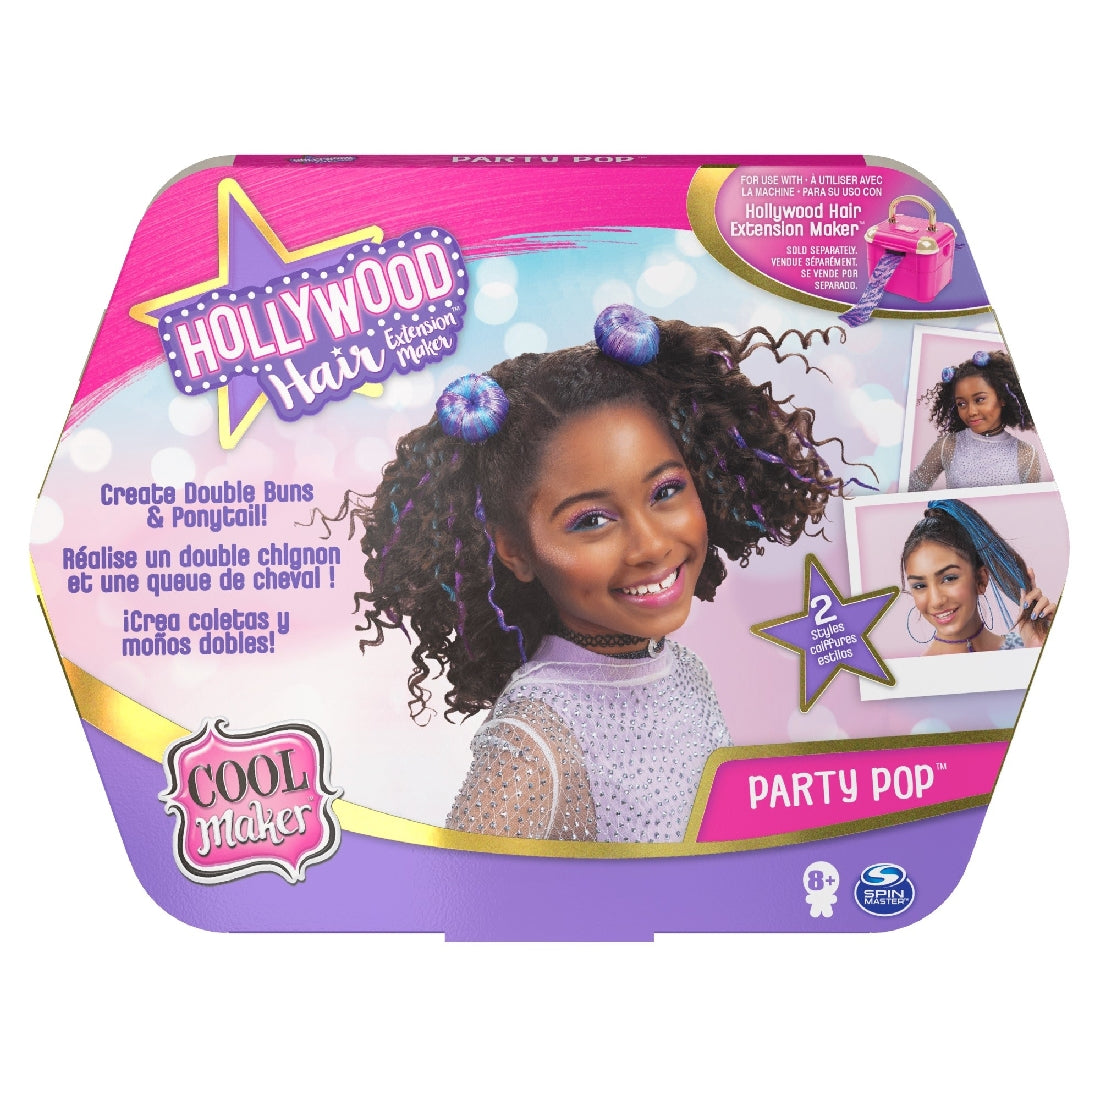 COOL MARKER HOLLYWOOD HAIR STYLING PACK - PARTY POP